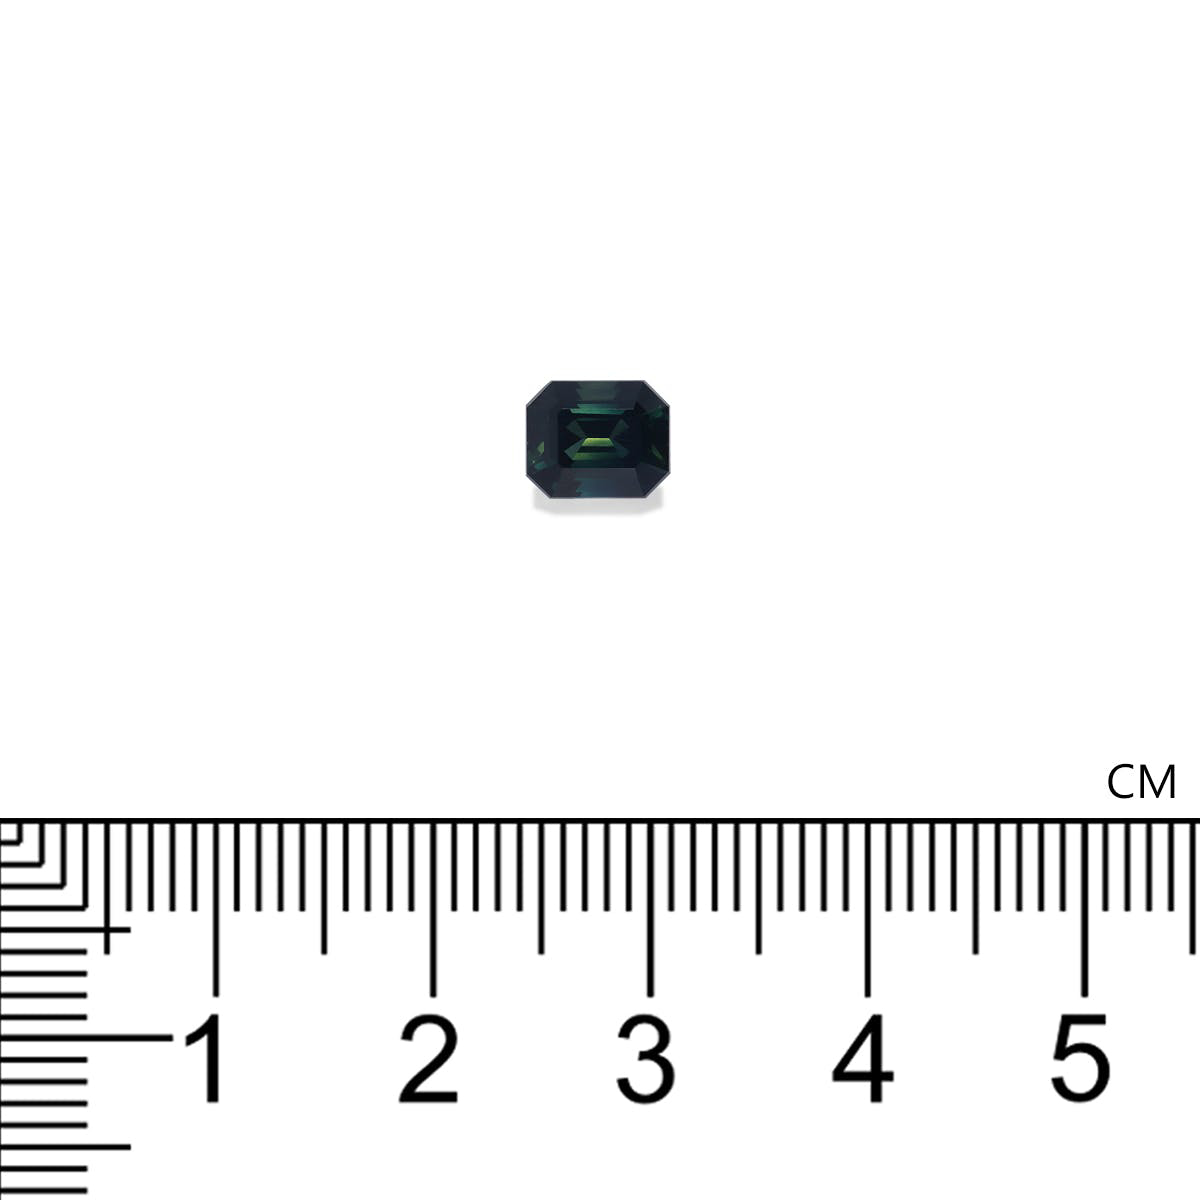 Picture of Blue Teal Sapphire 1.57ct (TL0061)